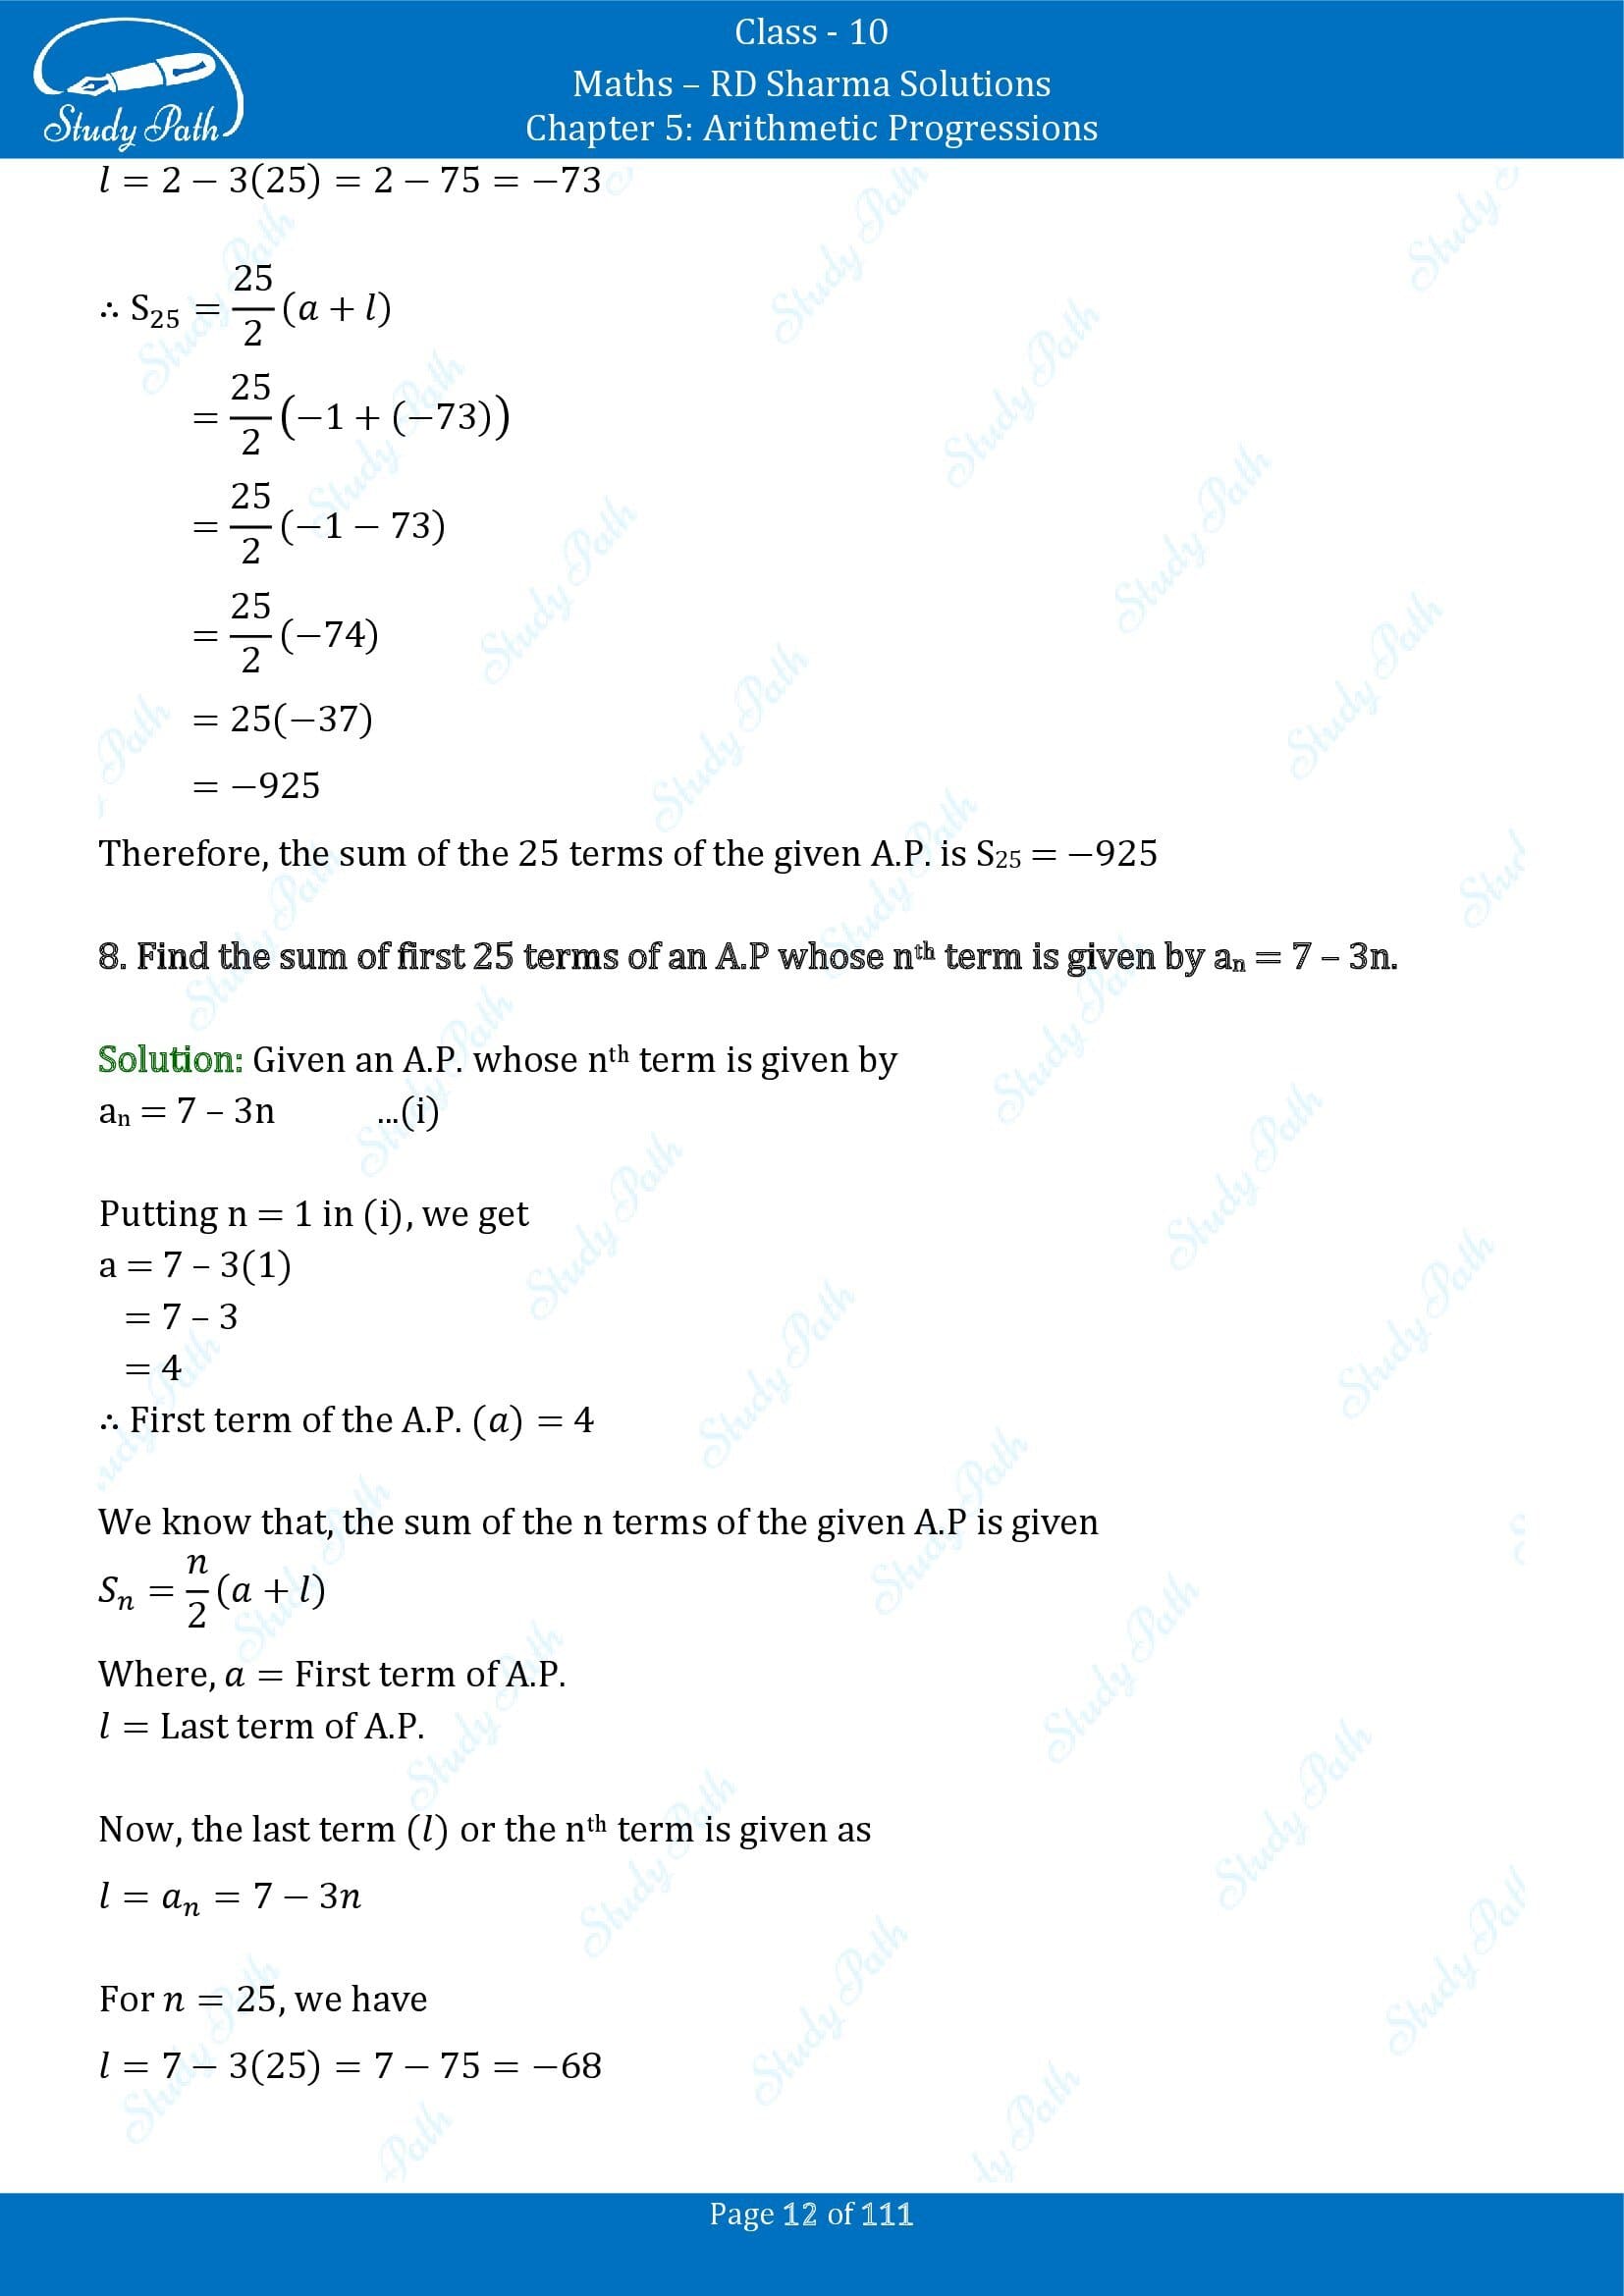 RD Sharma Solutions Class 10 Chapter 5 Arithmetic Progressions Exercise 5.6 00012